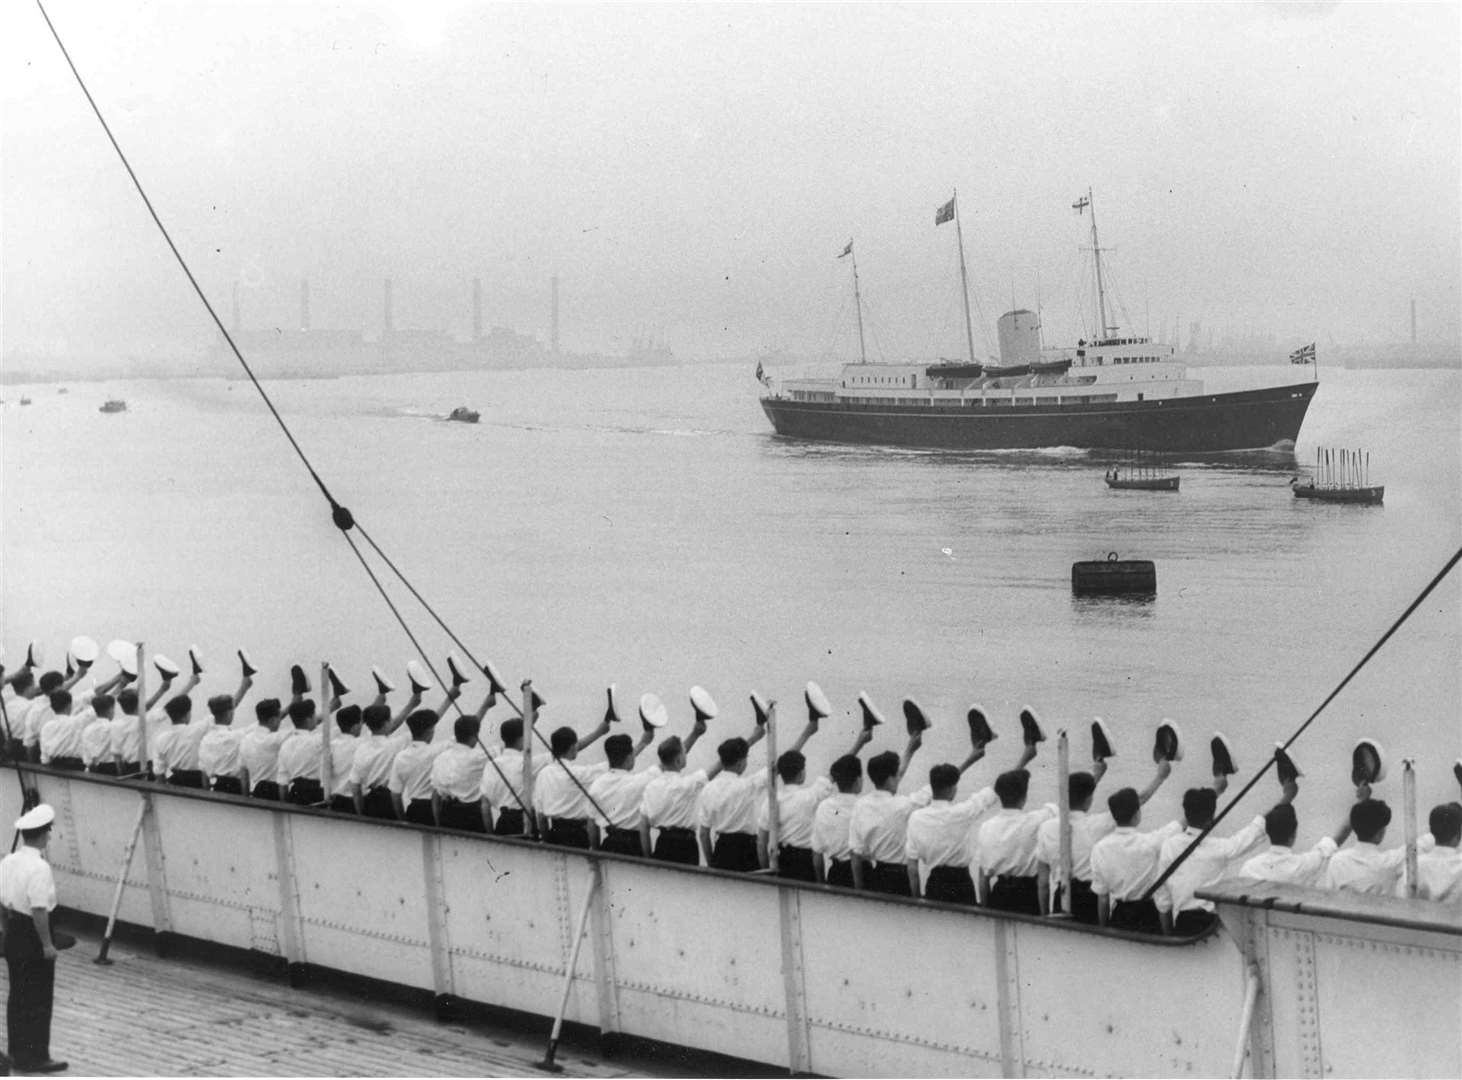 Crowds packed the promenade at Gravesend, which was decorated from end to end with bunting in May 1960. They watched the Royal Yacht Britannia pass, carrying the newly-weds Princess Margaret and Antony Armstrong-Jones off to their honeymoon in the Caribbean